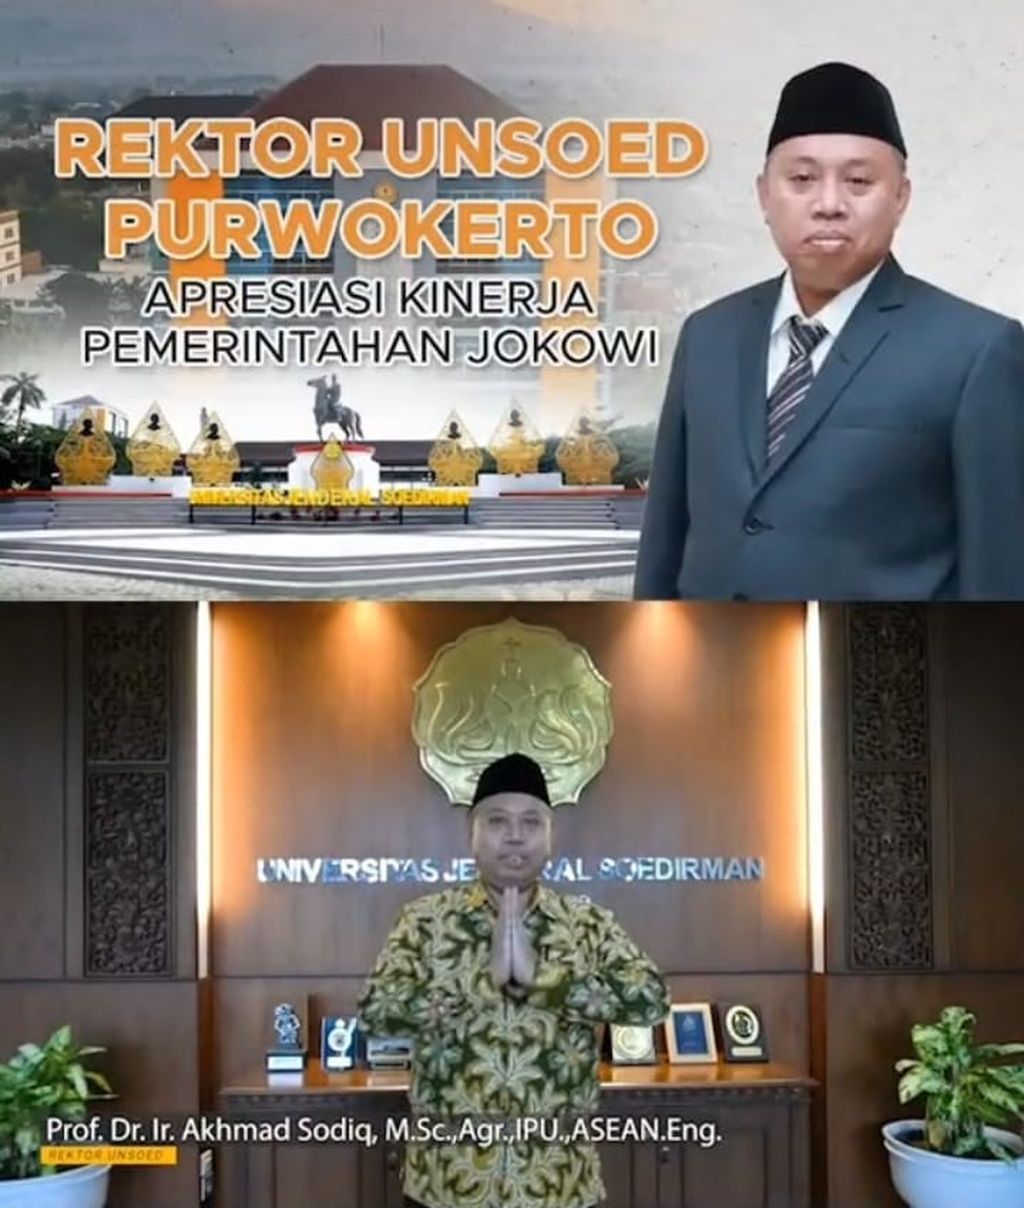 Screenshot of a video statement by Akhmad Sodiq, the Rector of Jenderal Soedirman University (Unsoed), located in Purwokerto.